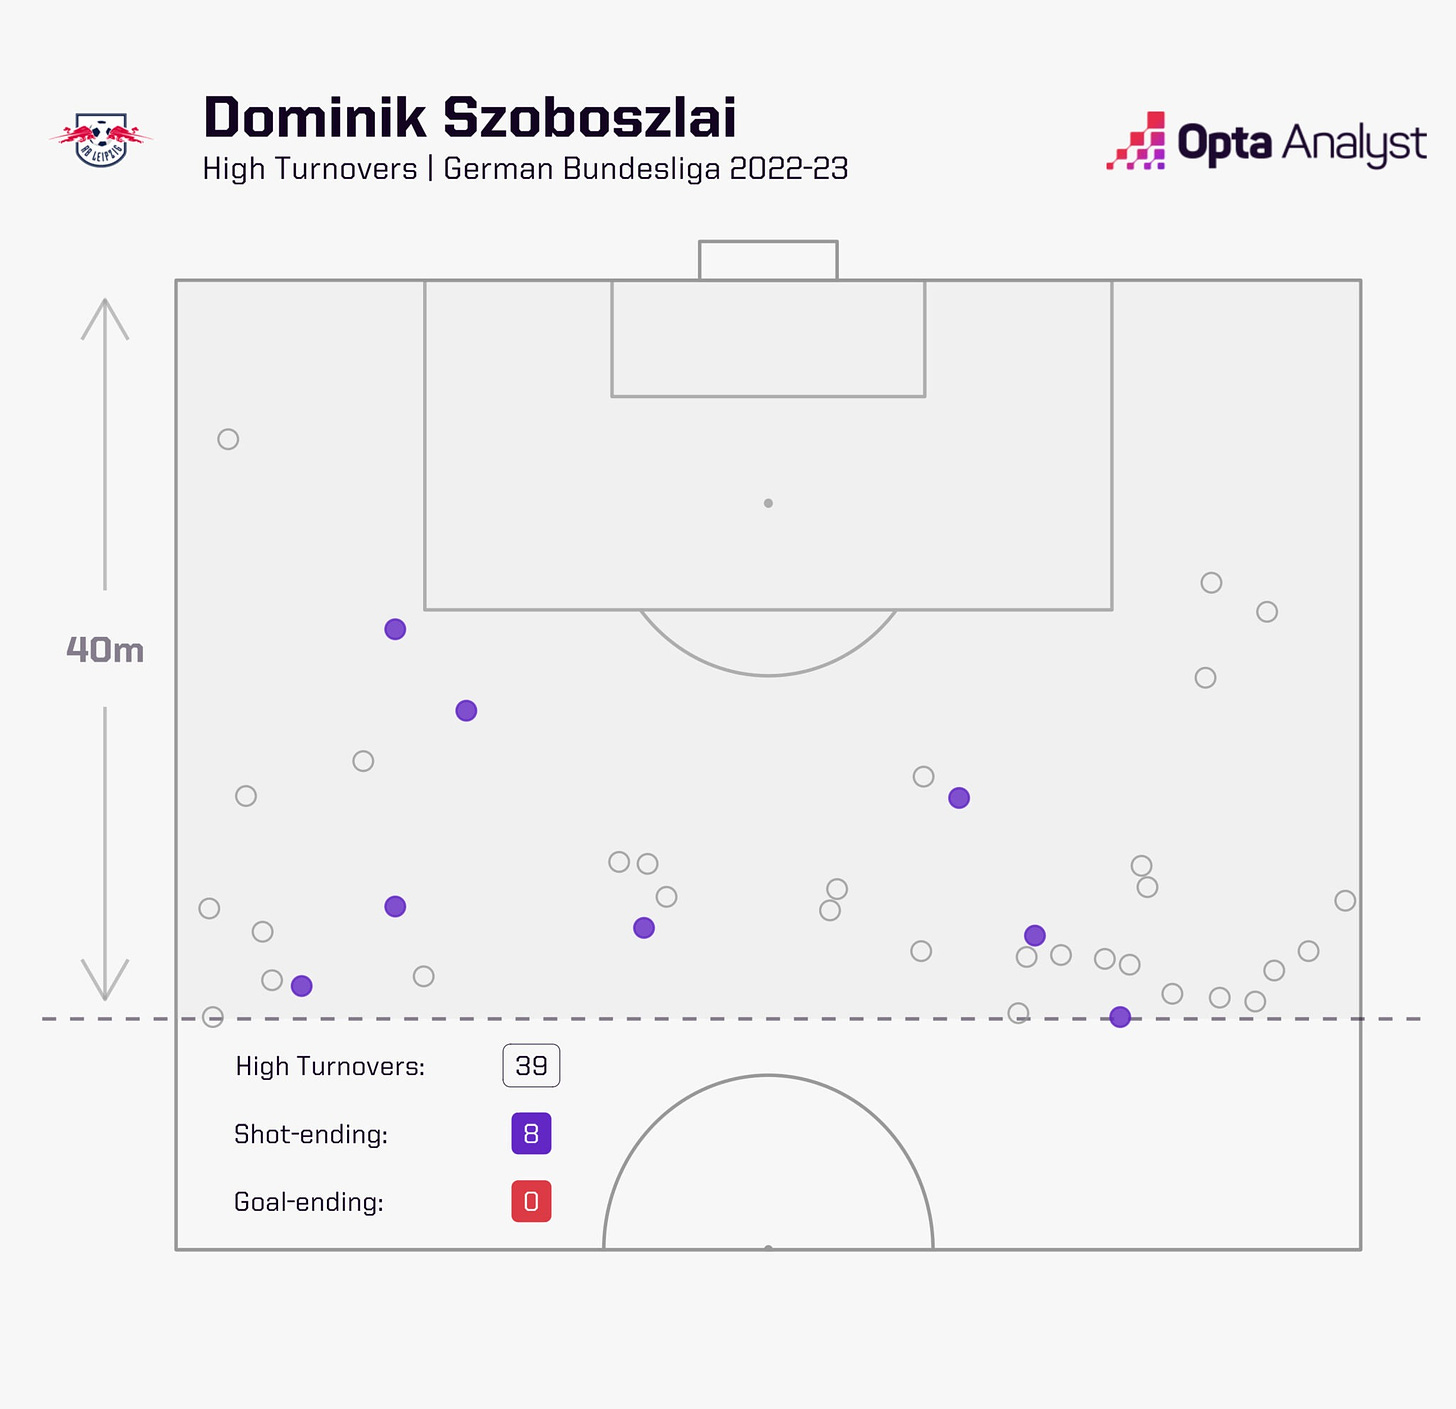 Szoboszlai's high turnovers in the Bundesliga last season. He completed 39 of them.